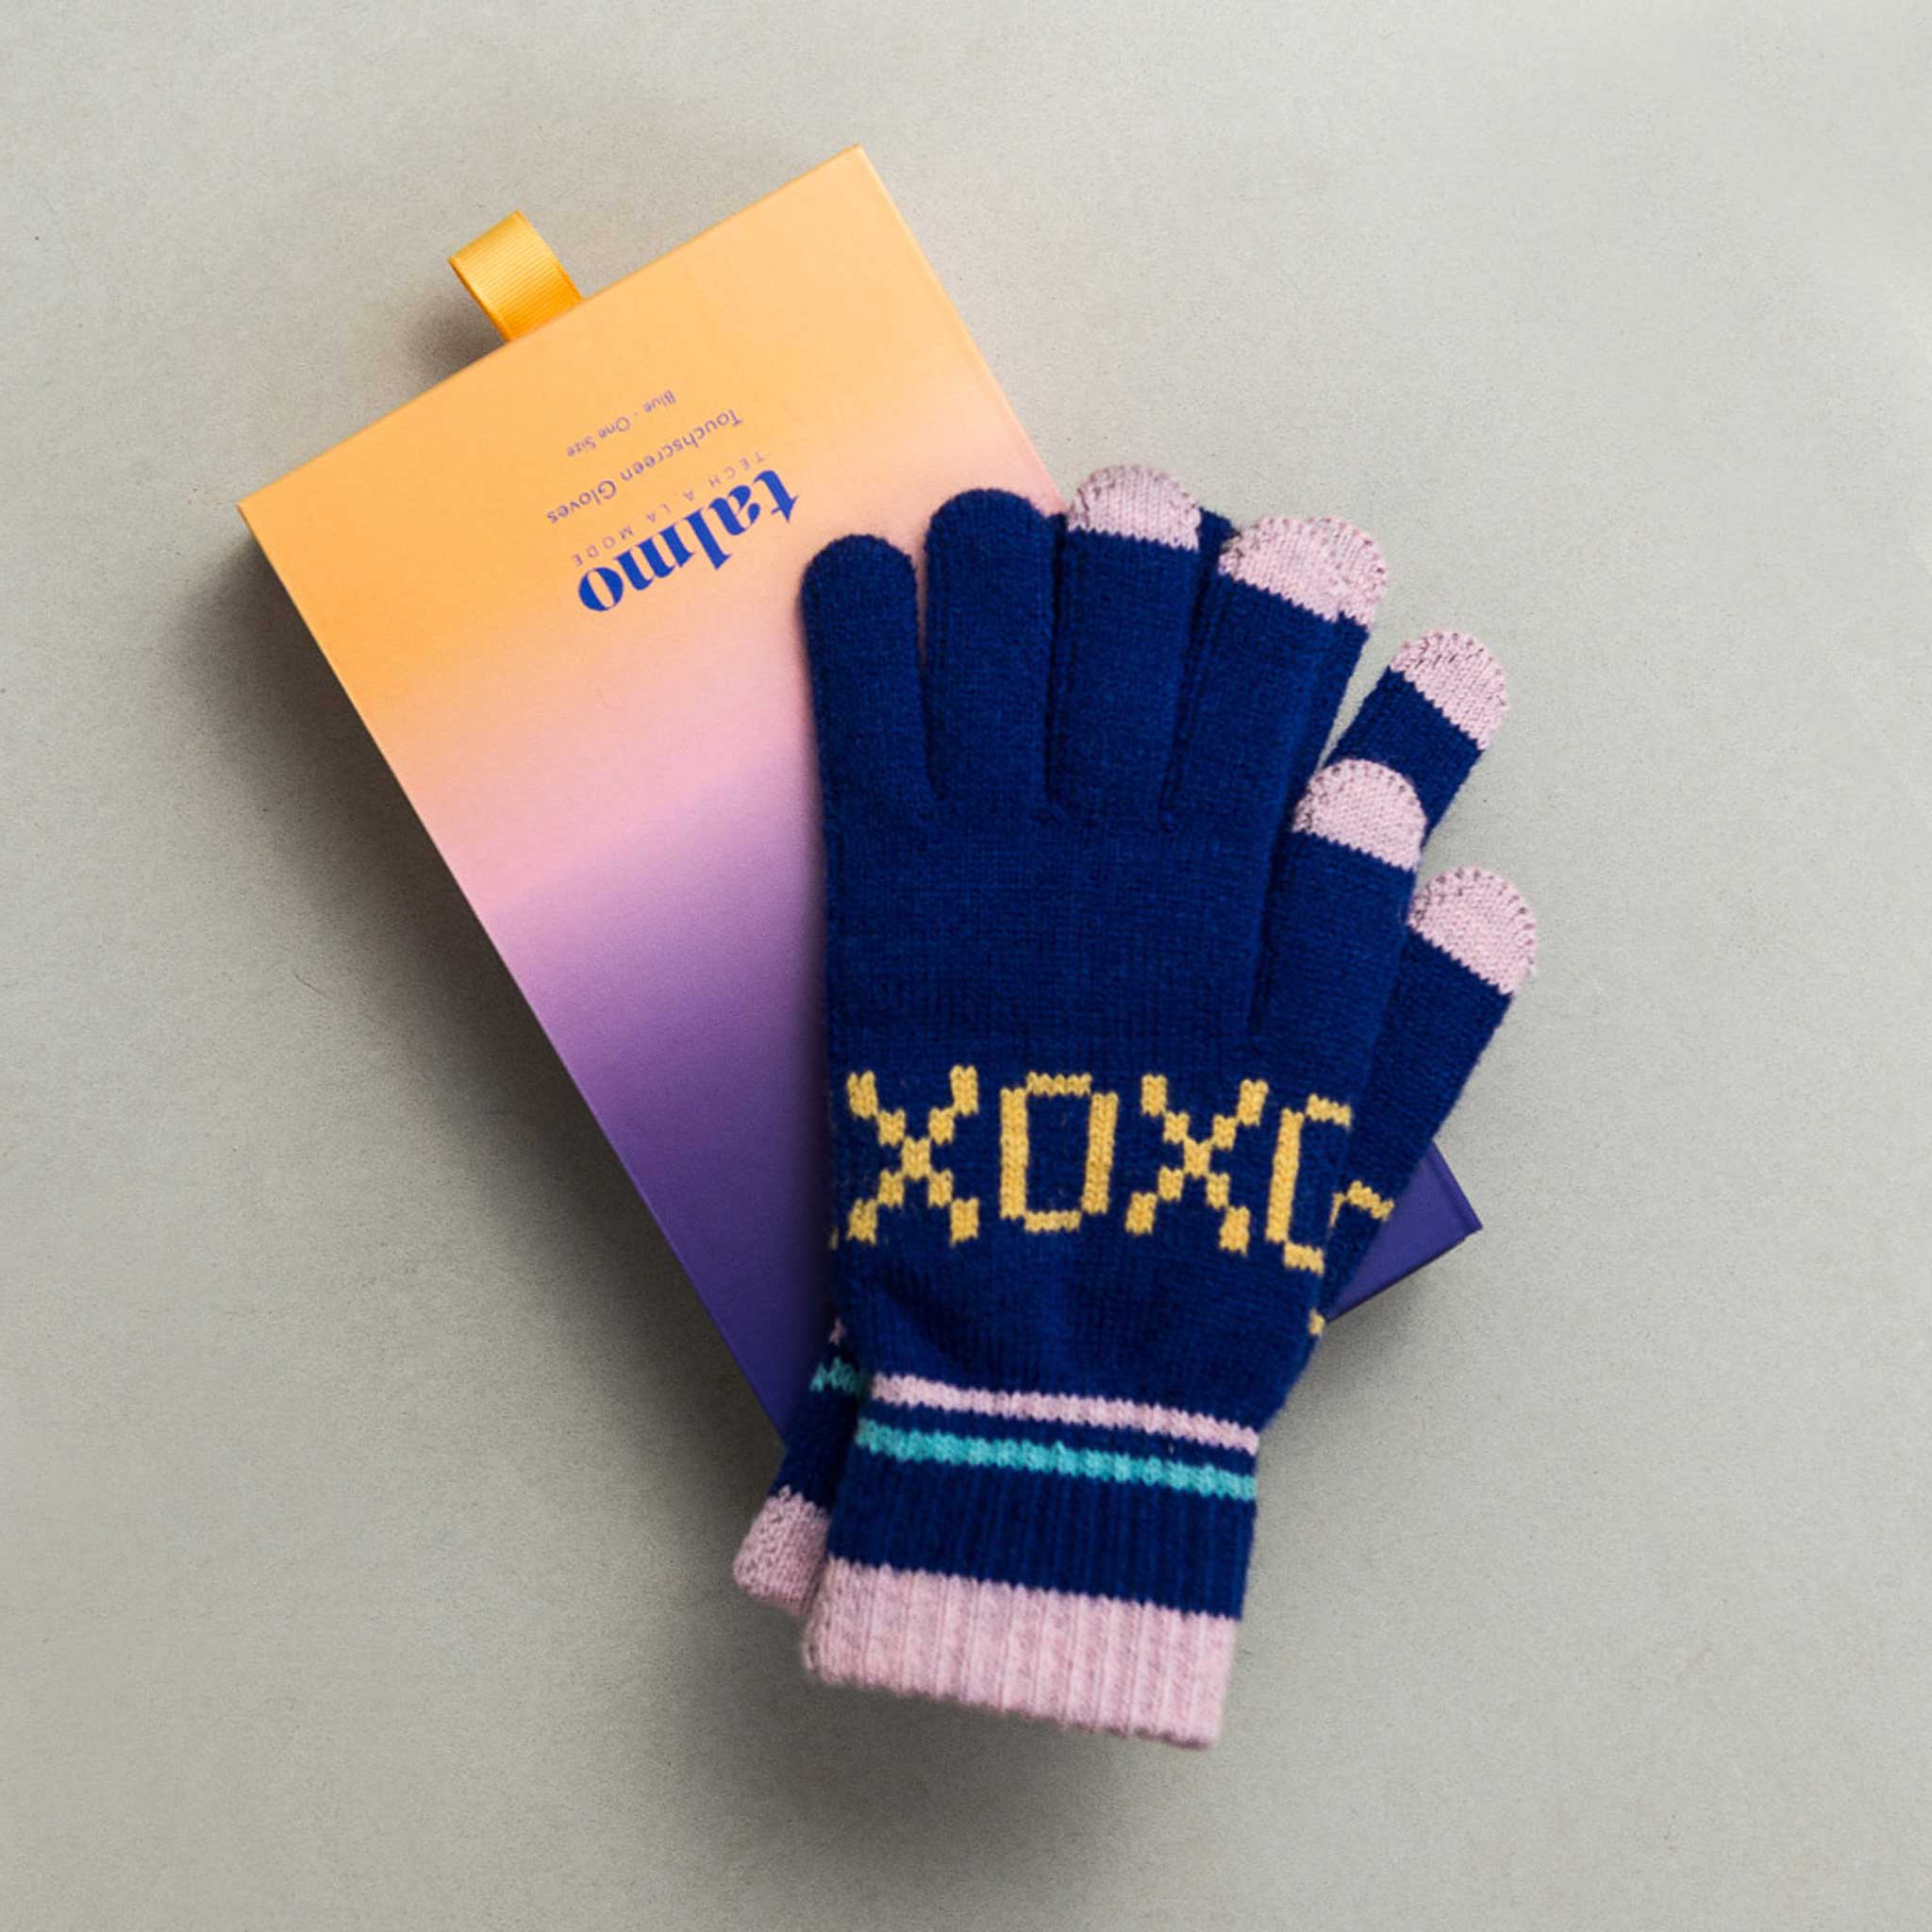 XOXO | Ladies' Touchscreen Smartphone HANDSCHUHE | One Size | talmo - Charles & Marie